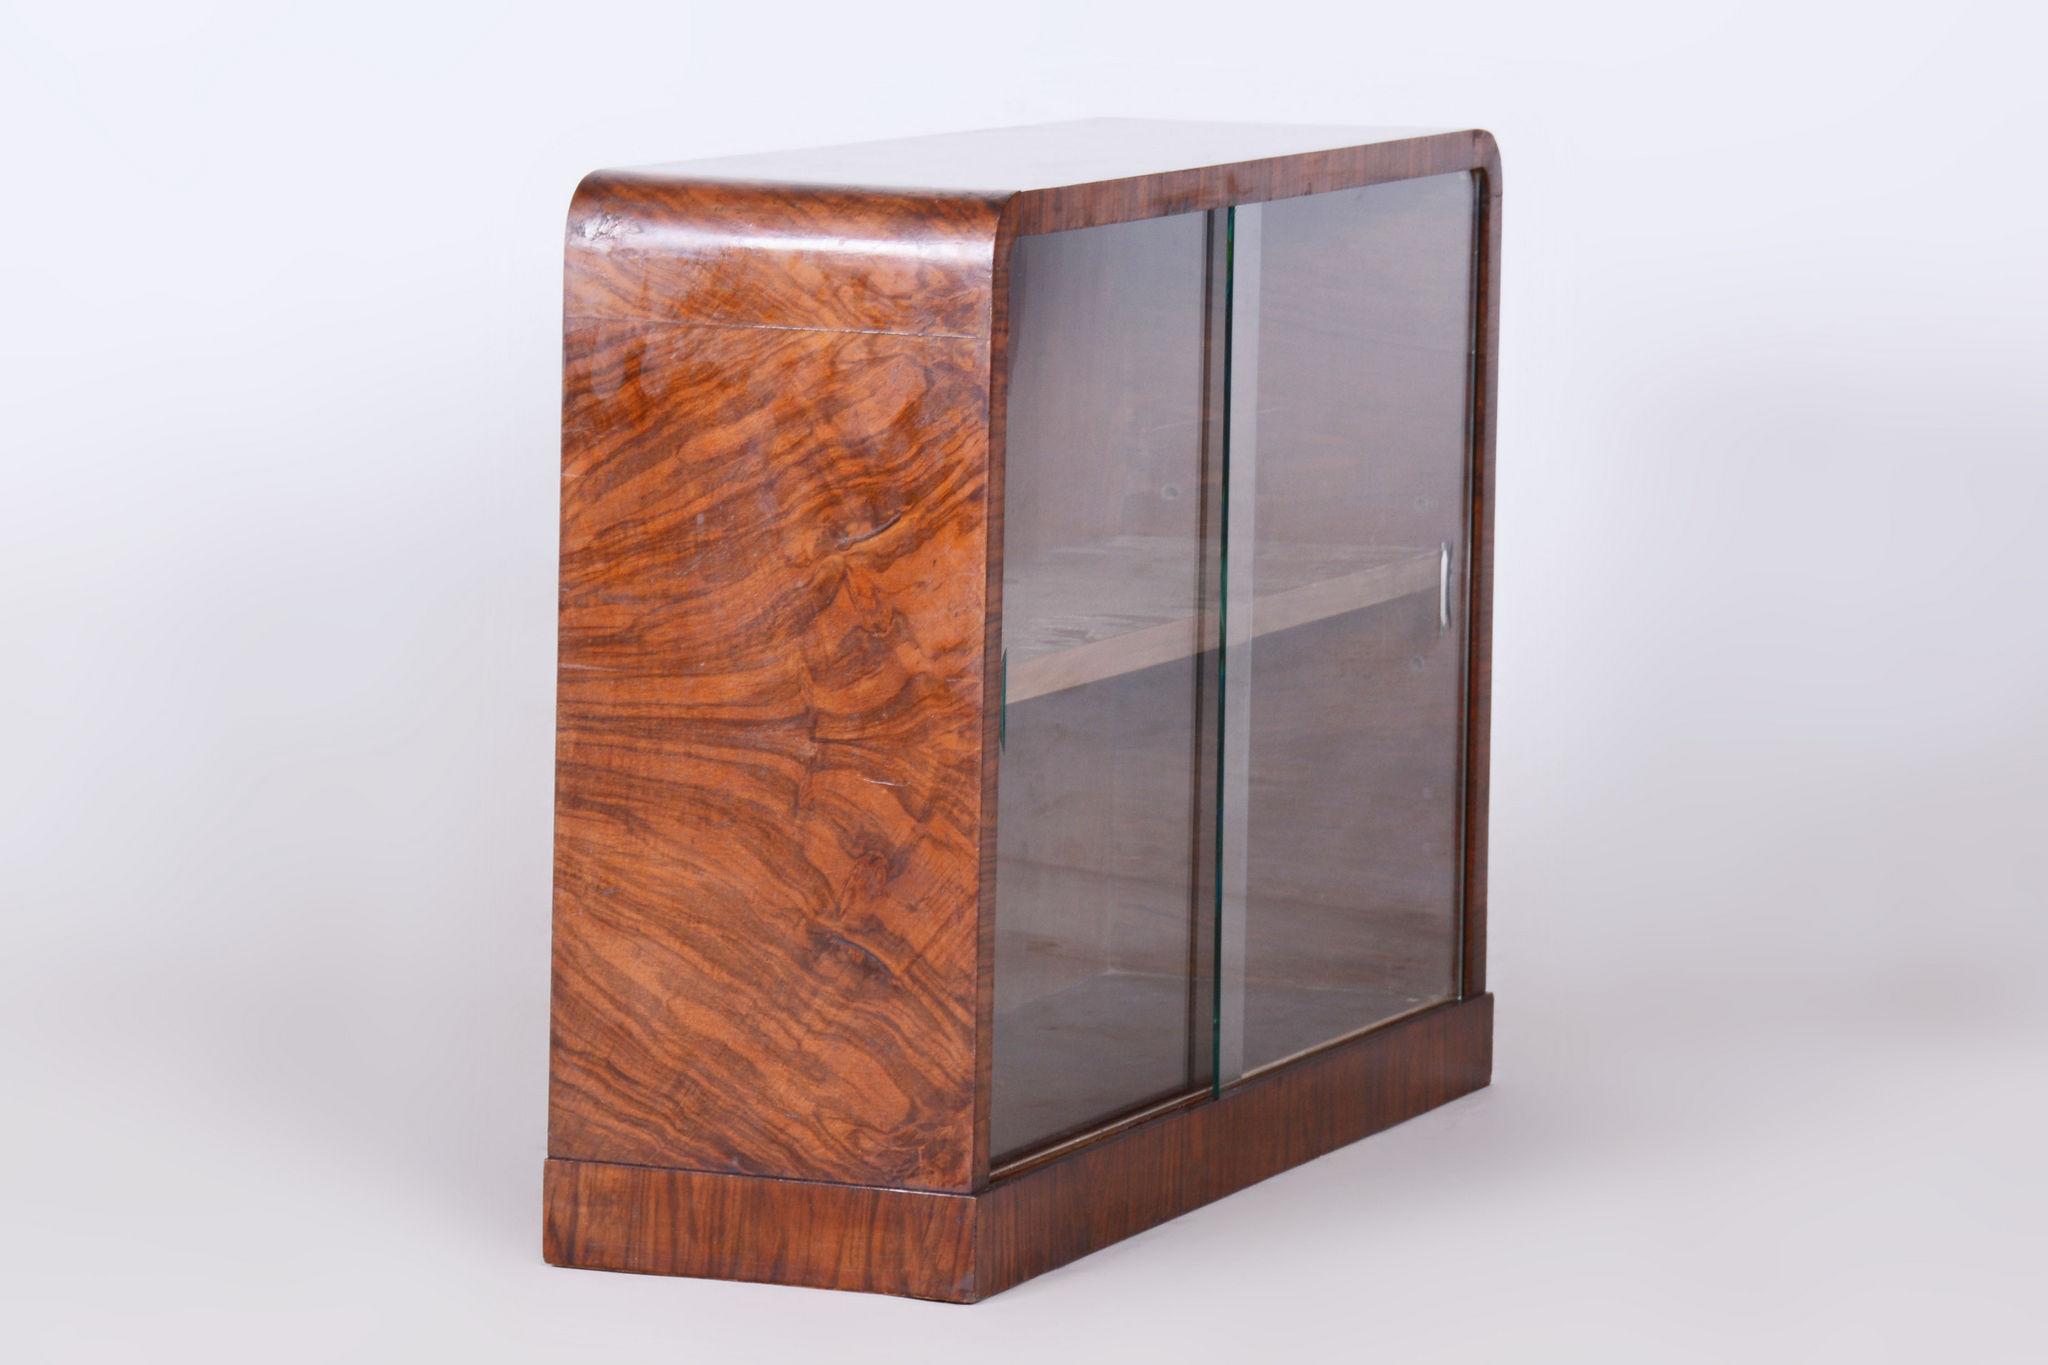 Small Restored Art Deco Display Bookcase, Walnut and Glass, Czech, 1930s For Sale 2